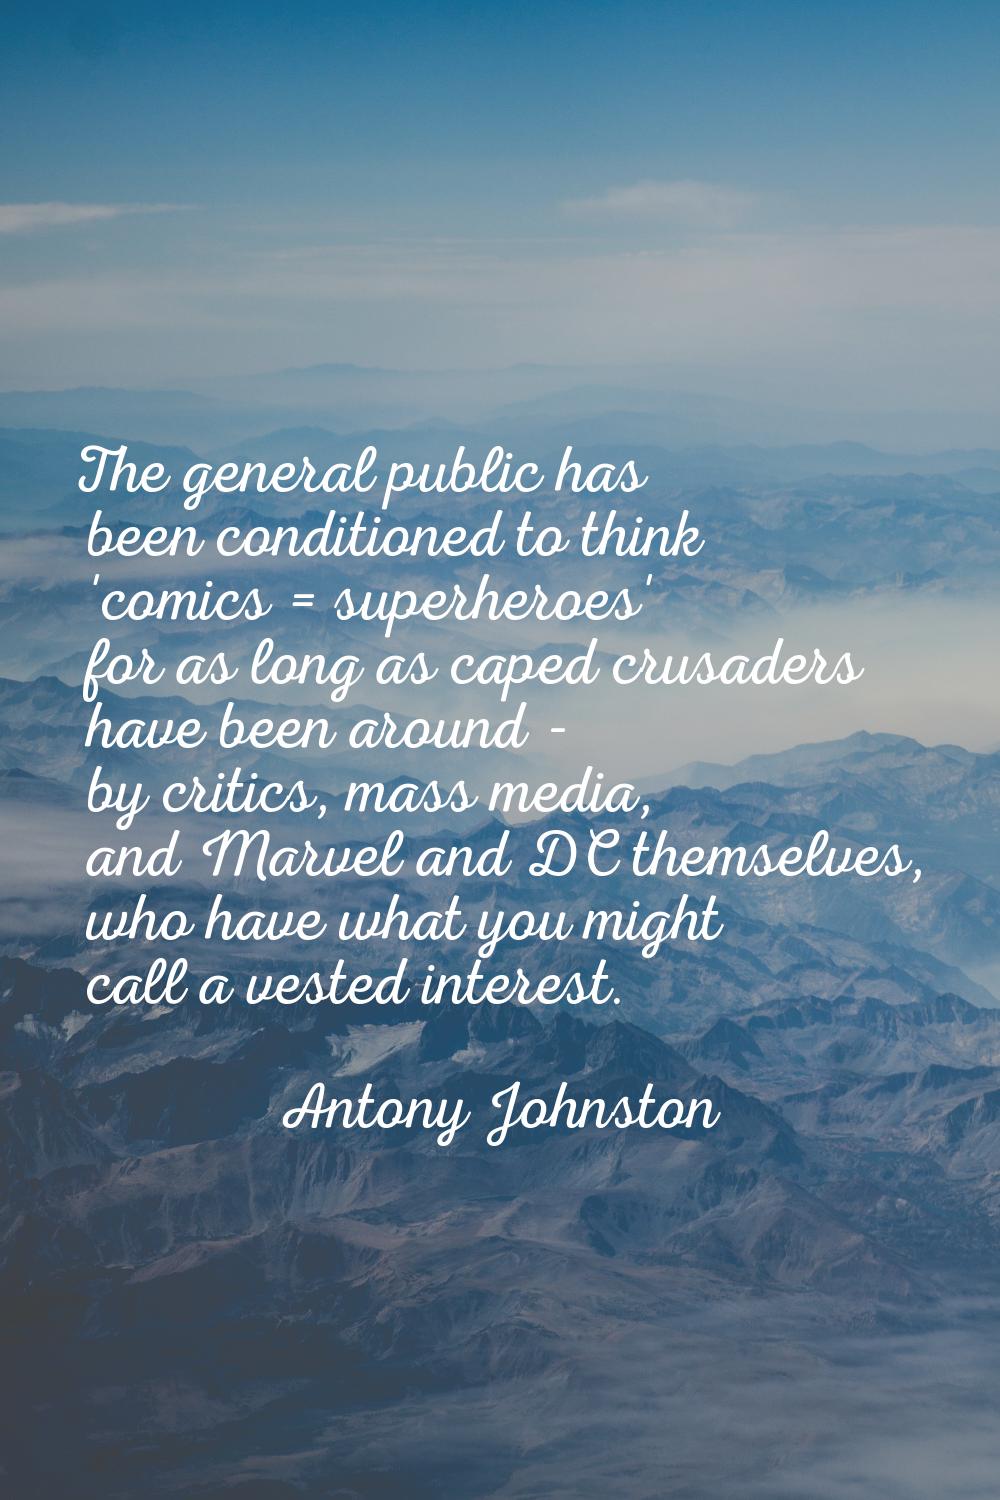 The general public has been conditioned to think 'comics = superheroes' for as long as caped crusad